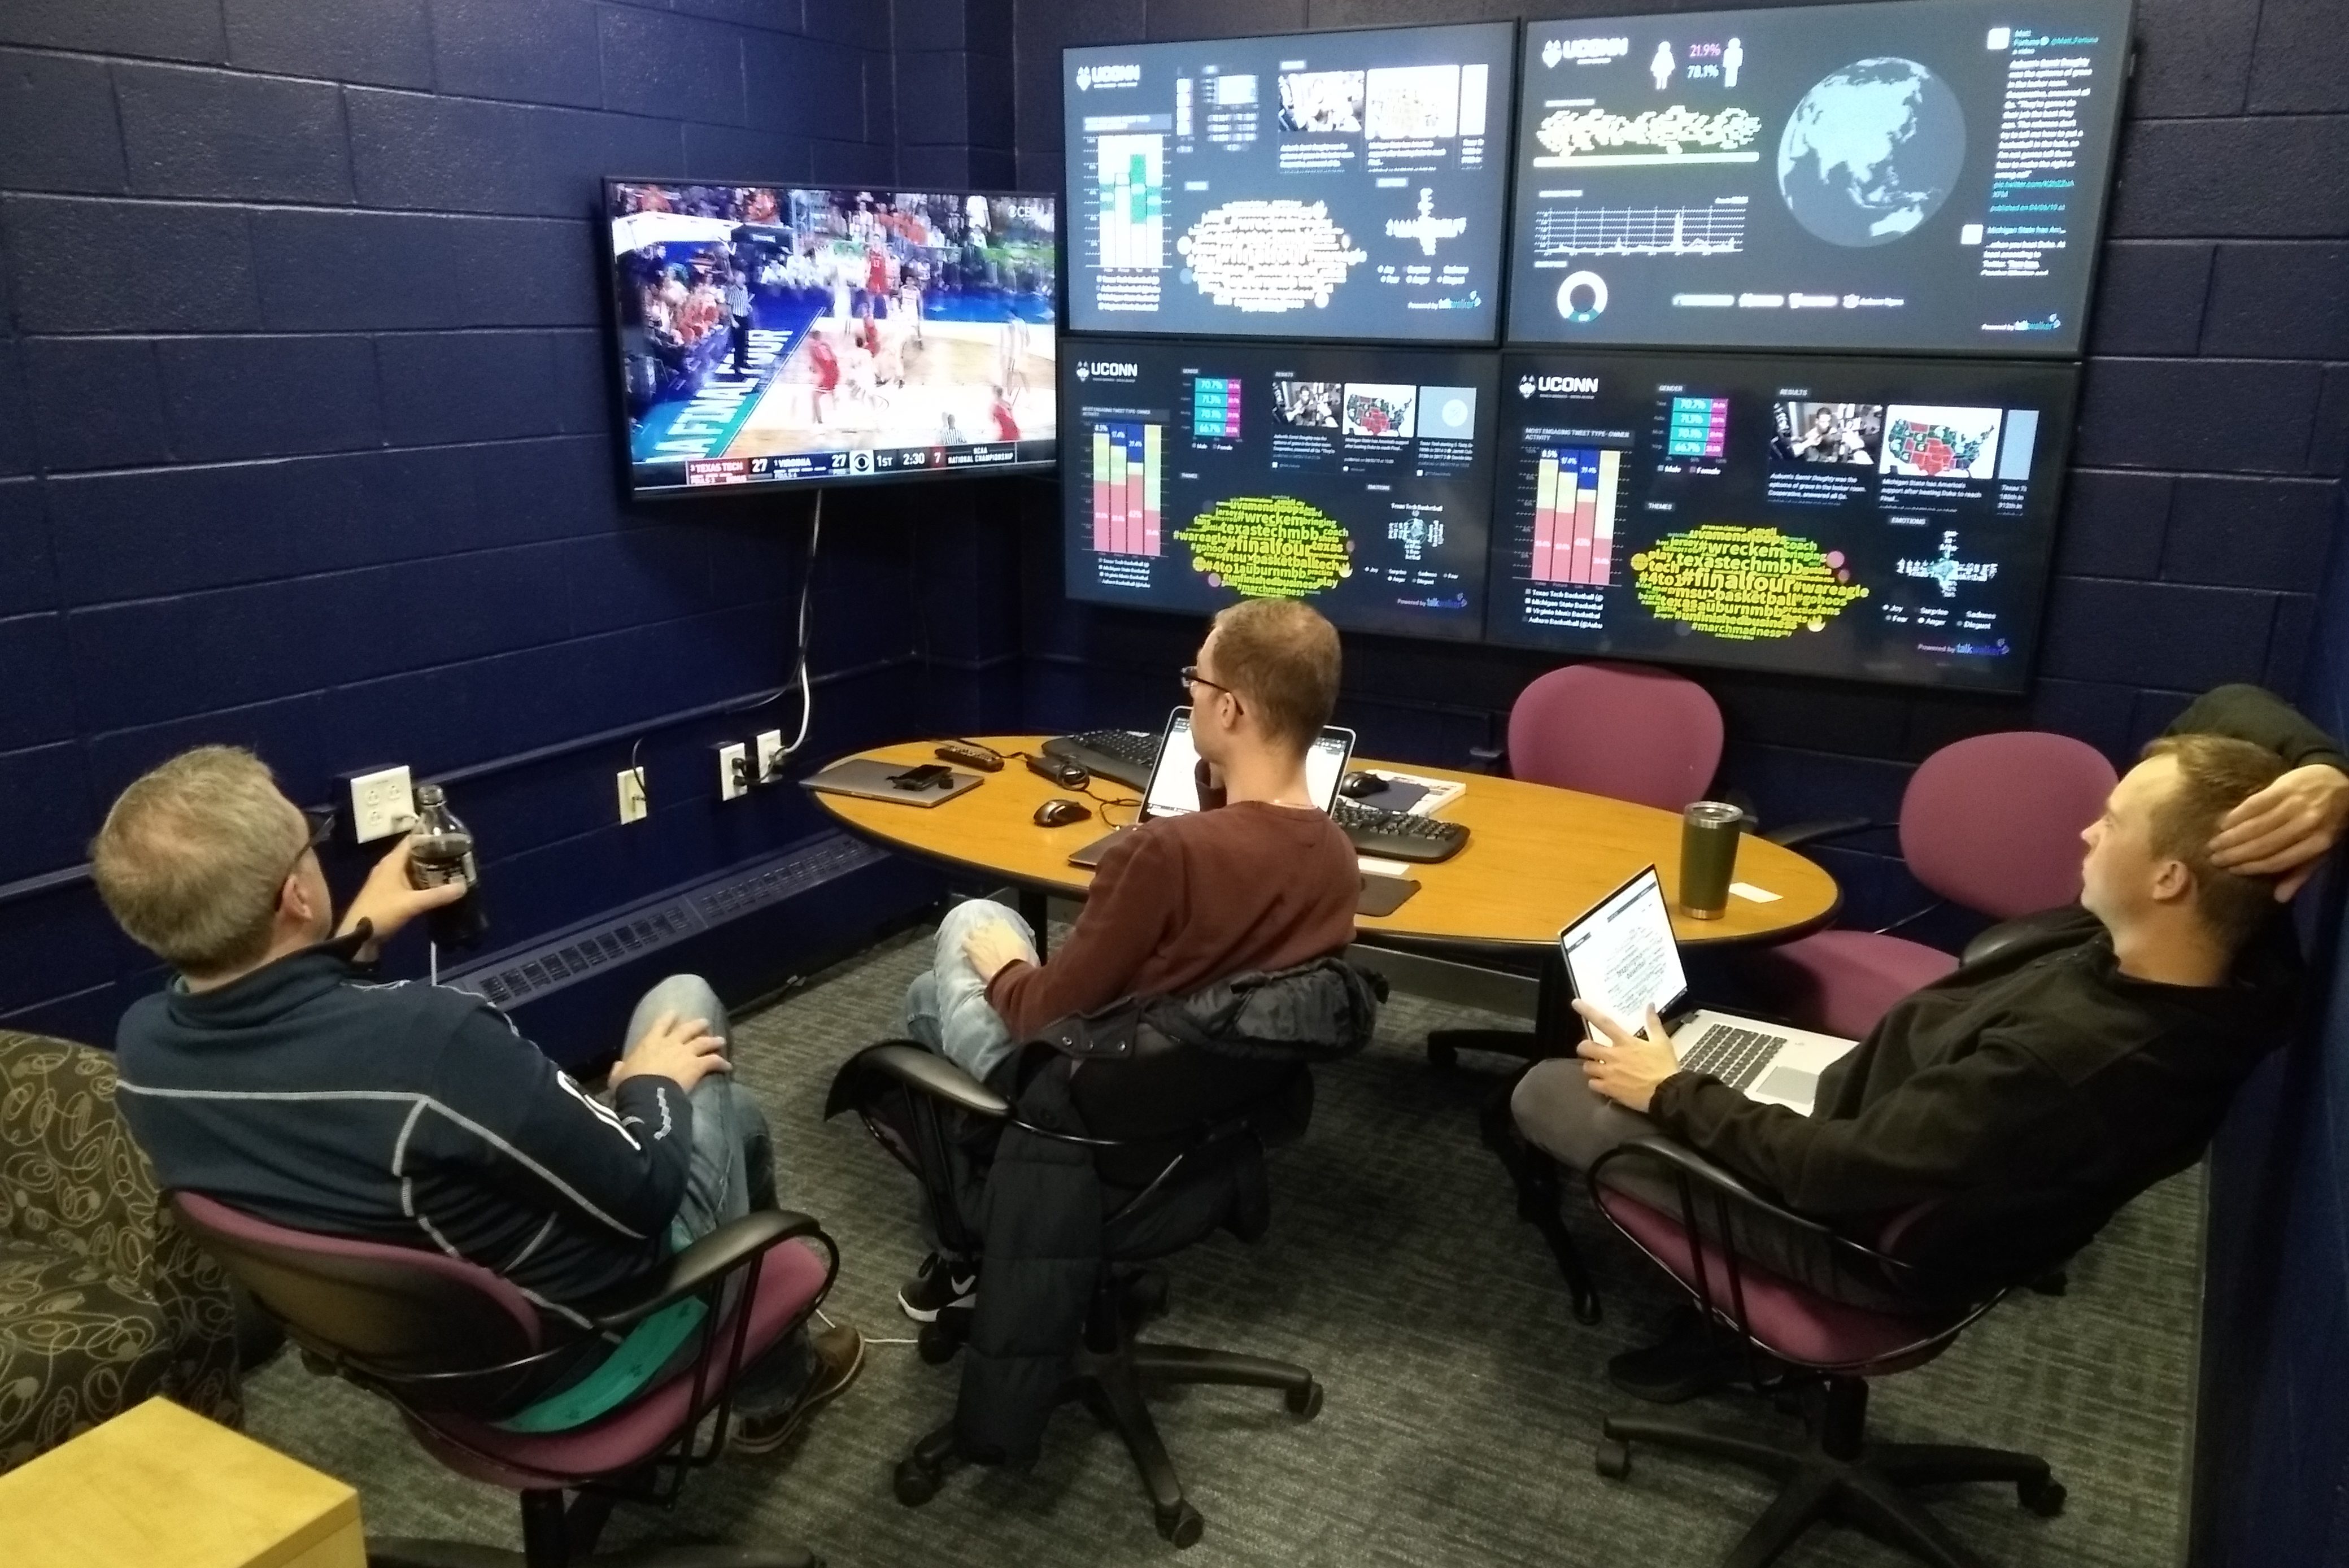 Three men sit in front of a wall full of screens showing a variety of graphics and images relating to social media use during a basketball game.